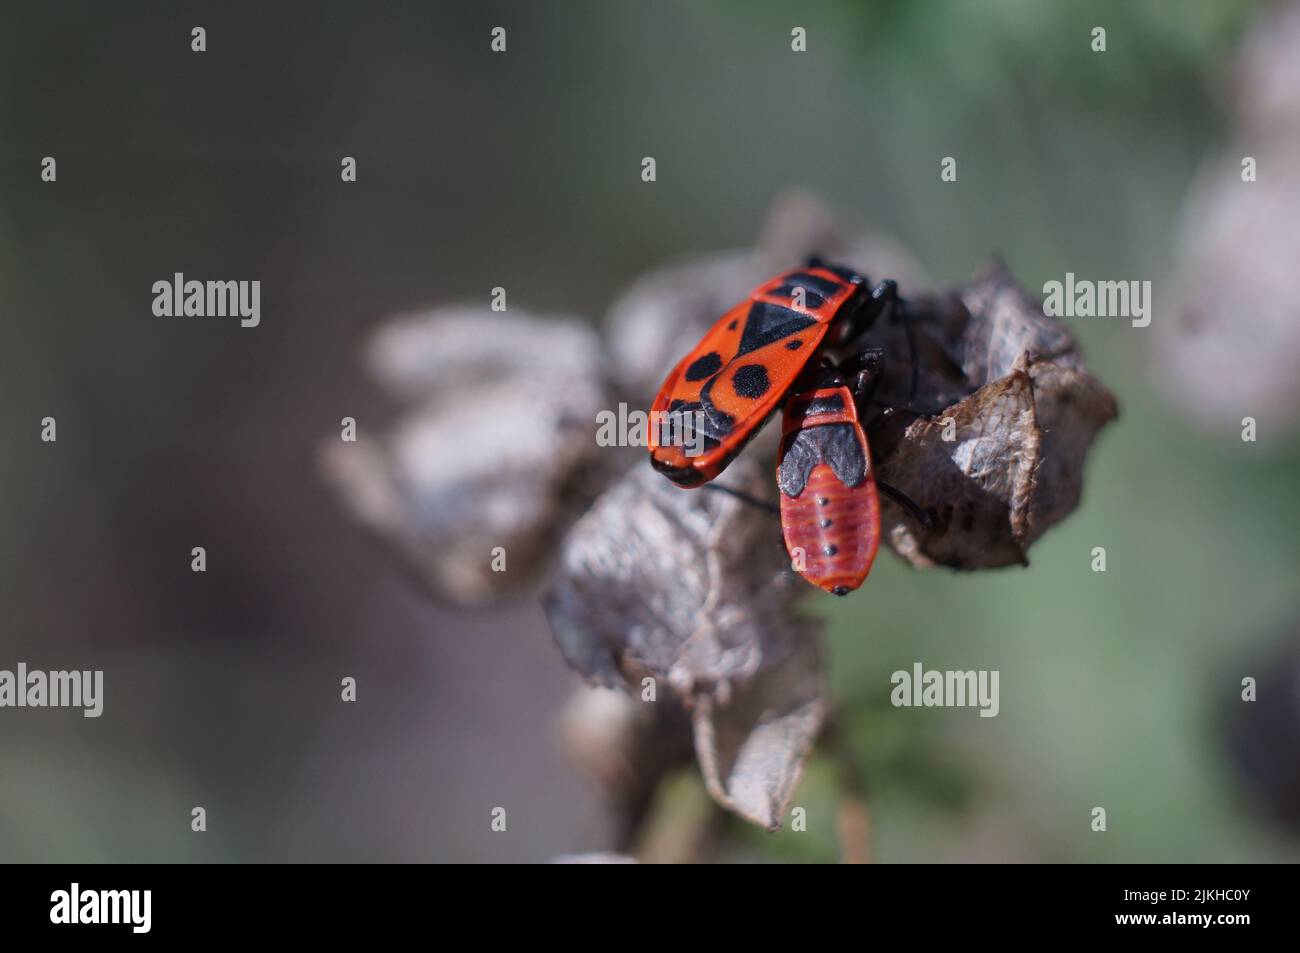 A pair of Bedbug soldiers on a faded flower Stock Photo